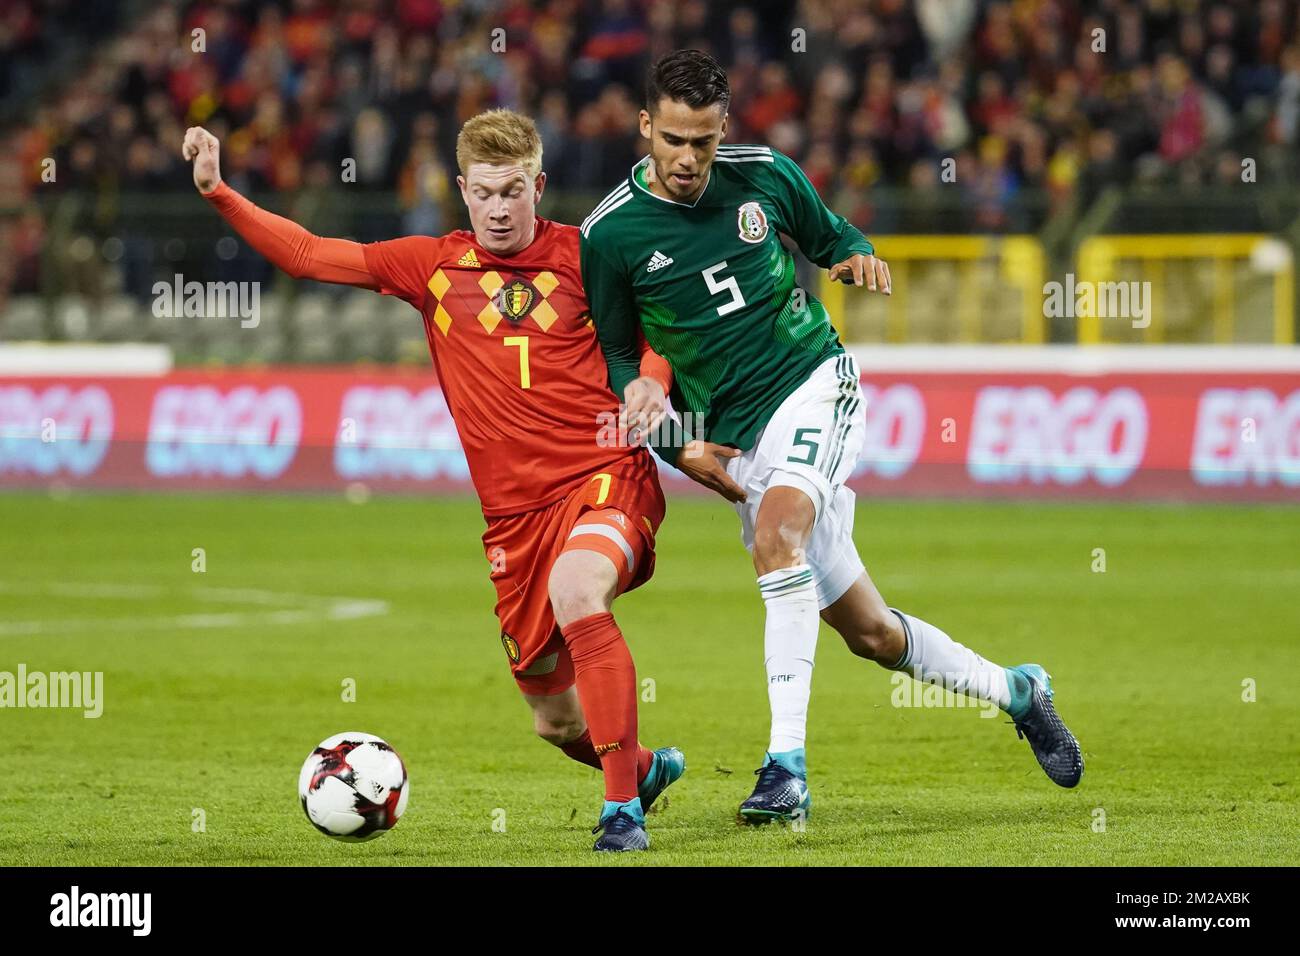 Belgium's Kevin De Bruyne and Mexico's Diego Reyes fight for the ball during a friendly soccer game between Belgian national team Red Devils and Mexico, Friday 10 November 2017, in Brugge. BELGA PHOTO BRUNO FAHY Stock Photo